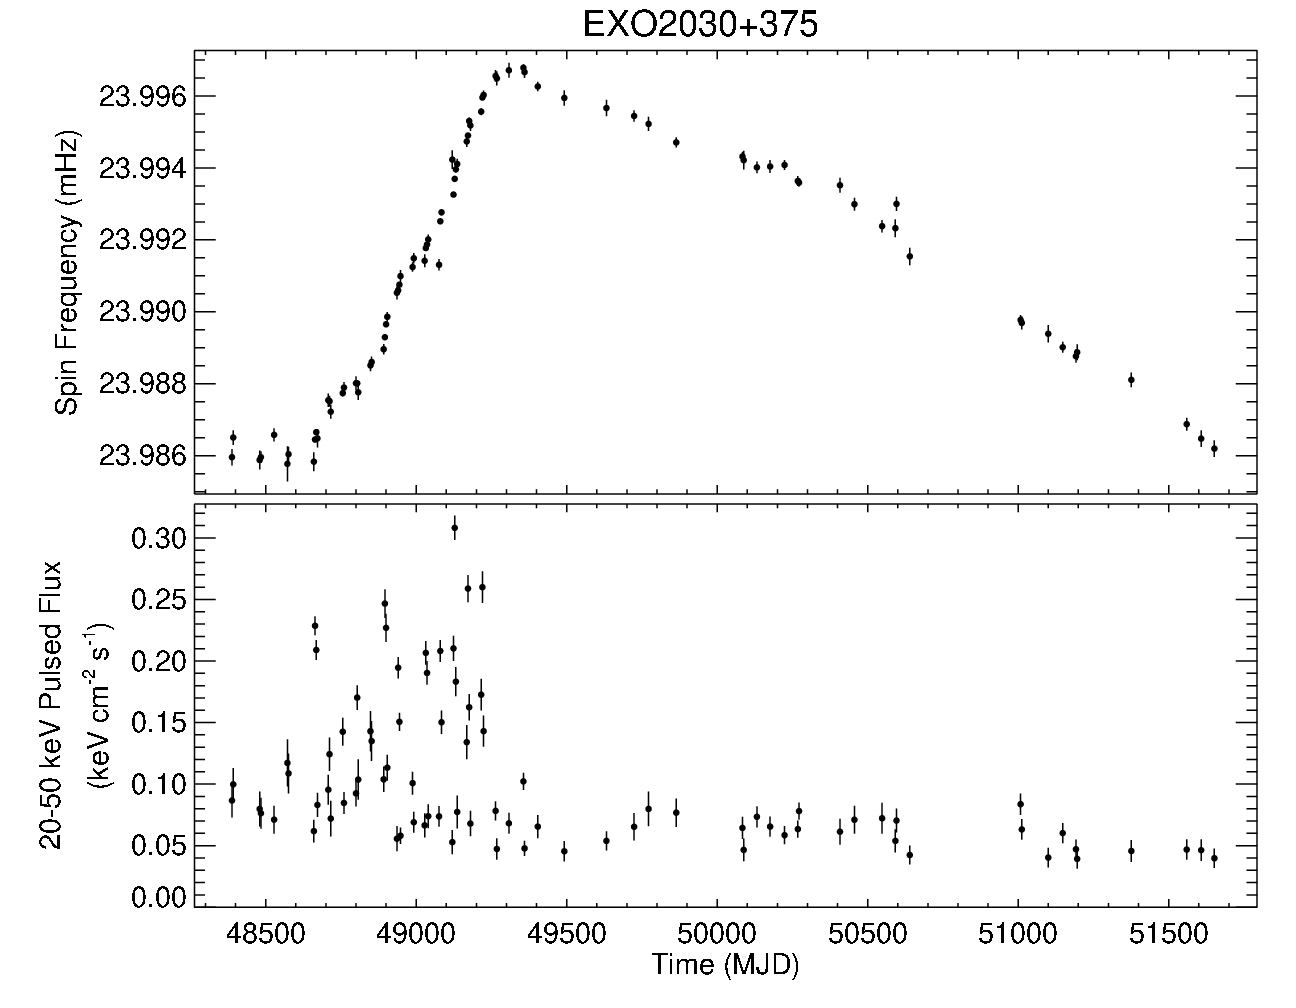 EXO 2030+375 Short Frequency History